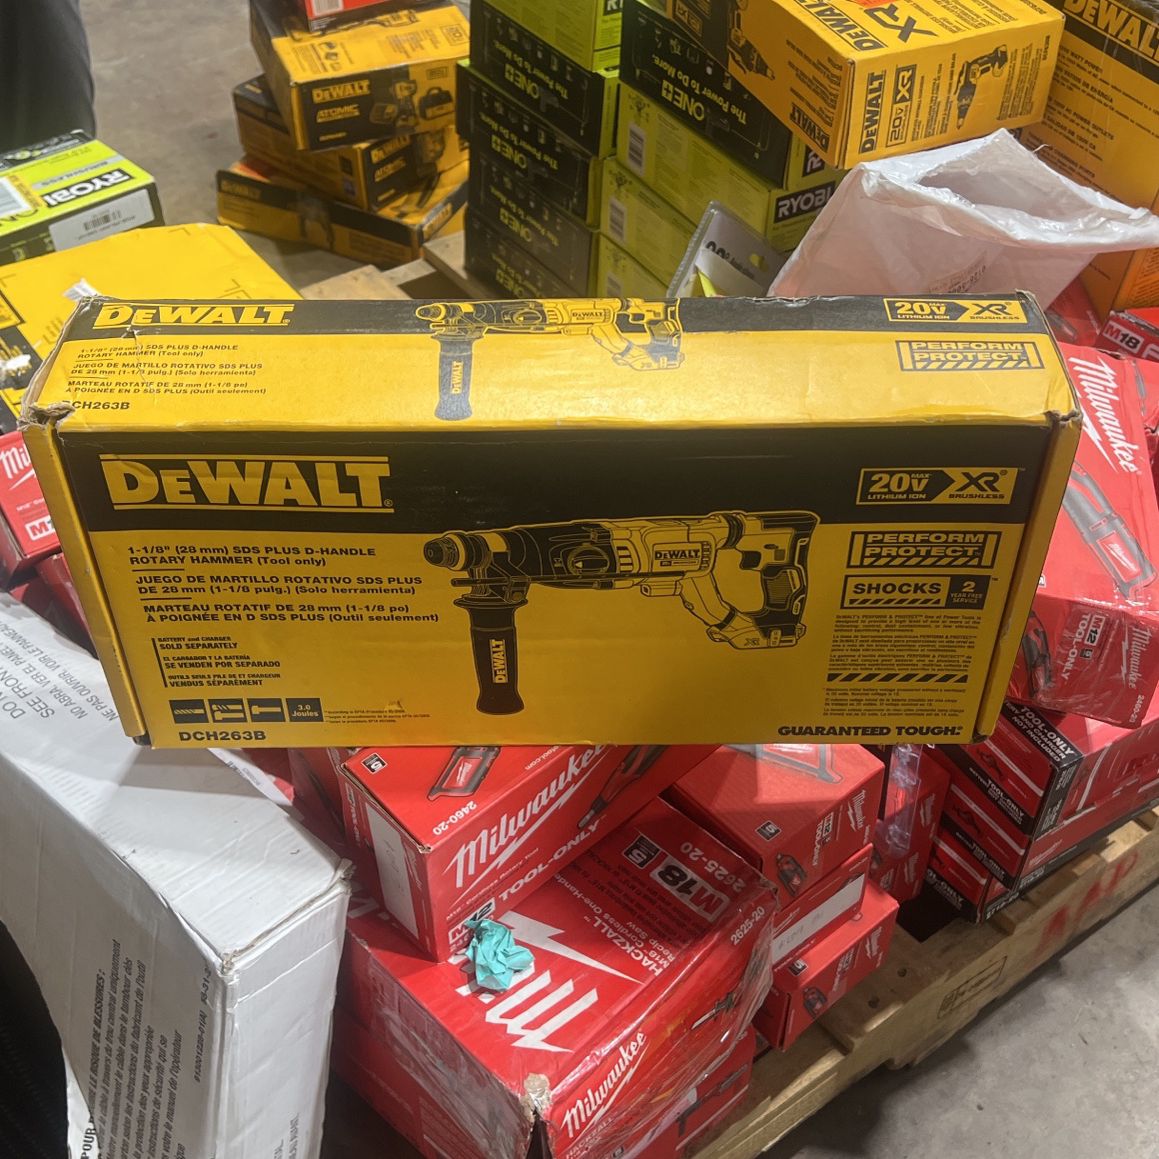 DEWALT 8.5-Amp 1-1/8-in Sds-plus Variable Speed Corded Rotary Hammer Drill